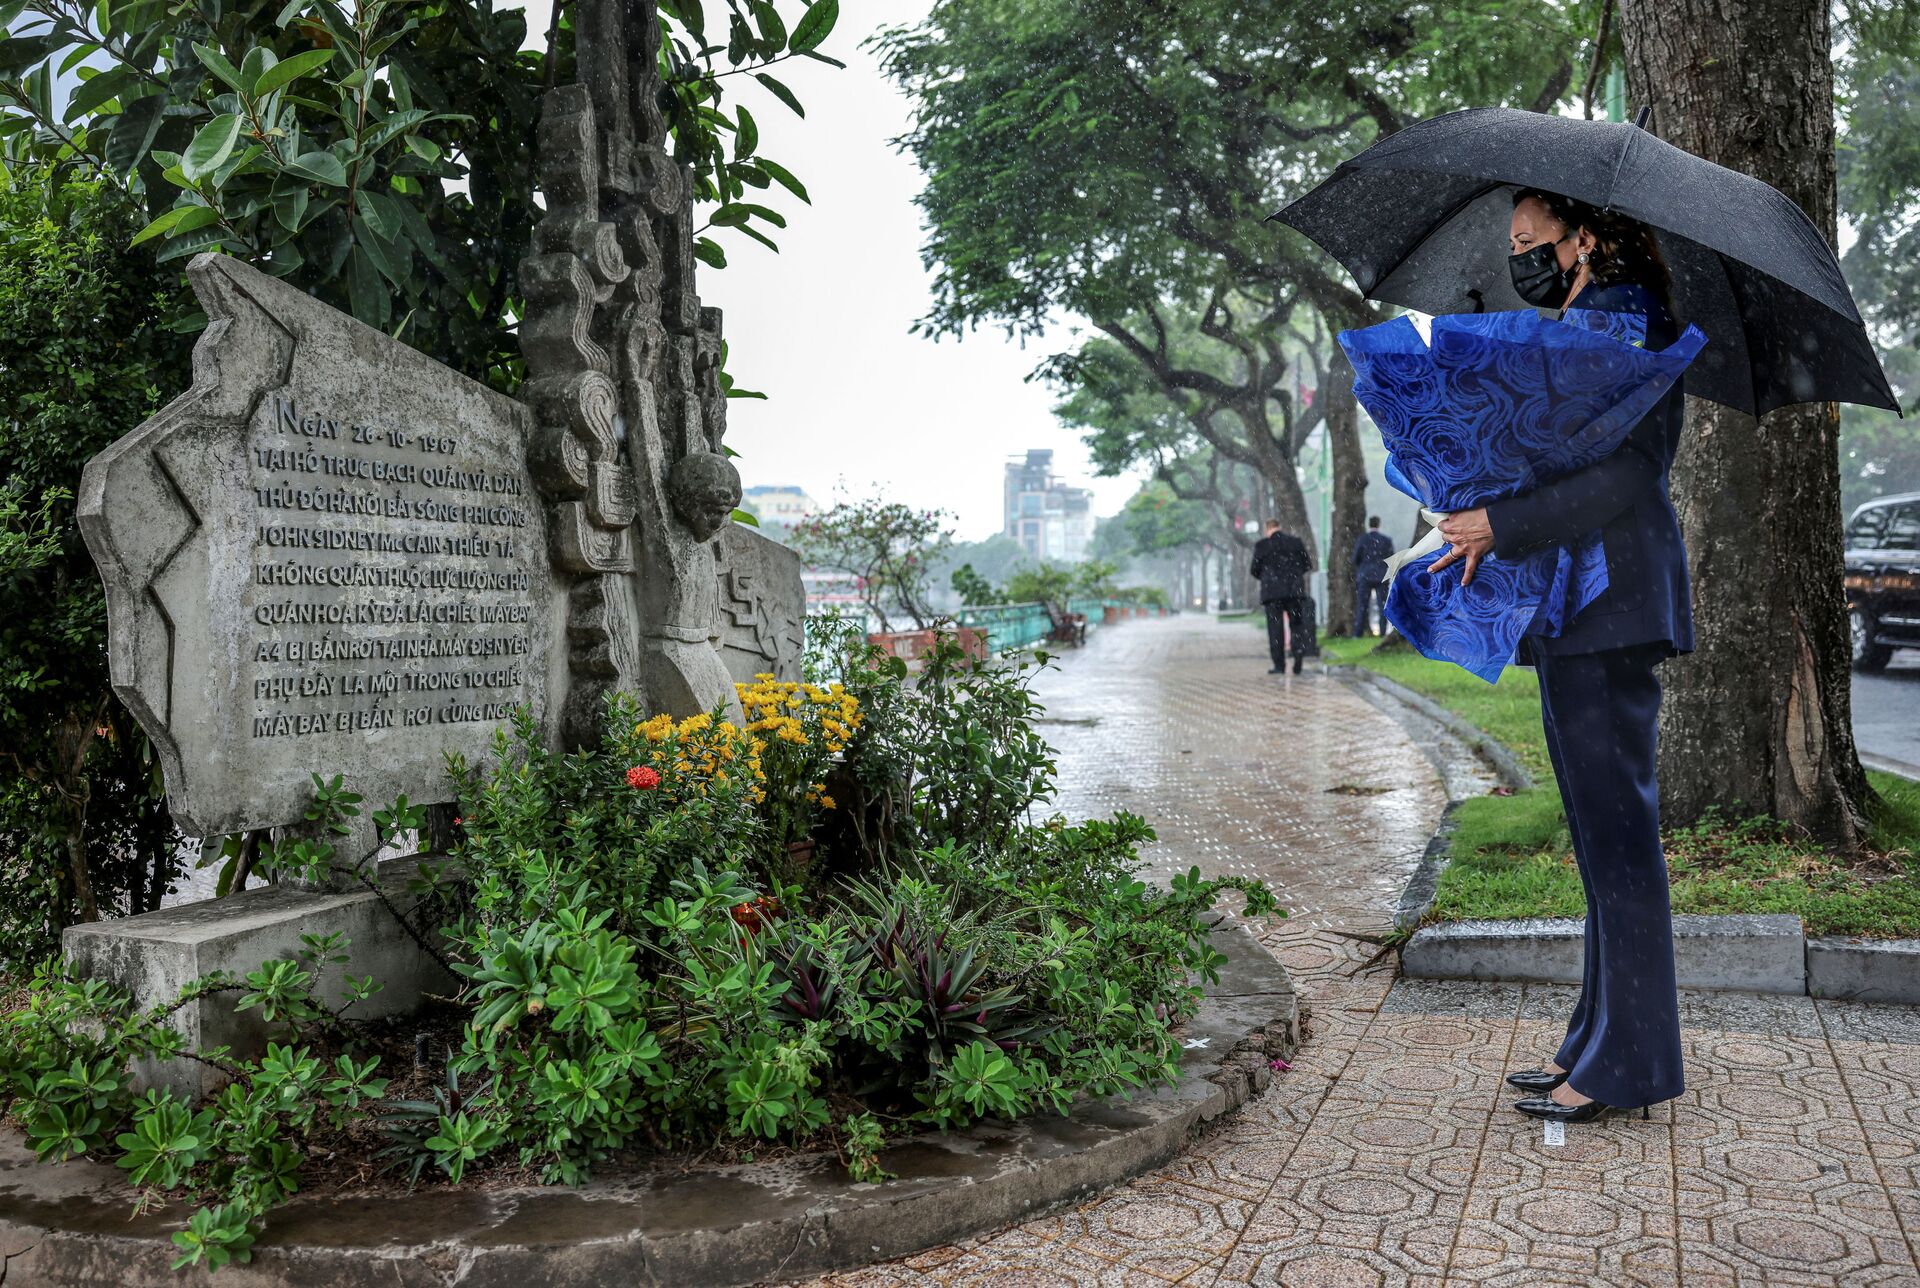 US Vice President Kamala Harris lays flowers at the Senator John McCain memorial site, where his Navy aircraft was shot down by the North Vietnamese, on the three-year anniversary of his death, in Hanoi, Vietnam, August, 25, 2021 - Sputnik International, 1920, 07.09.2021